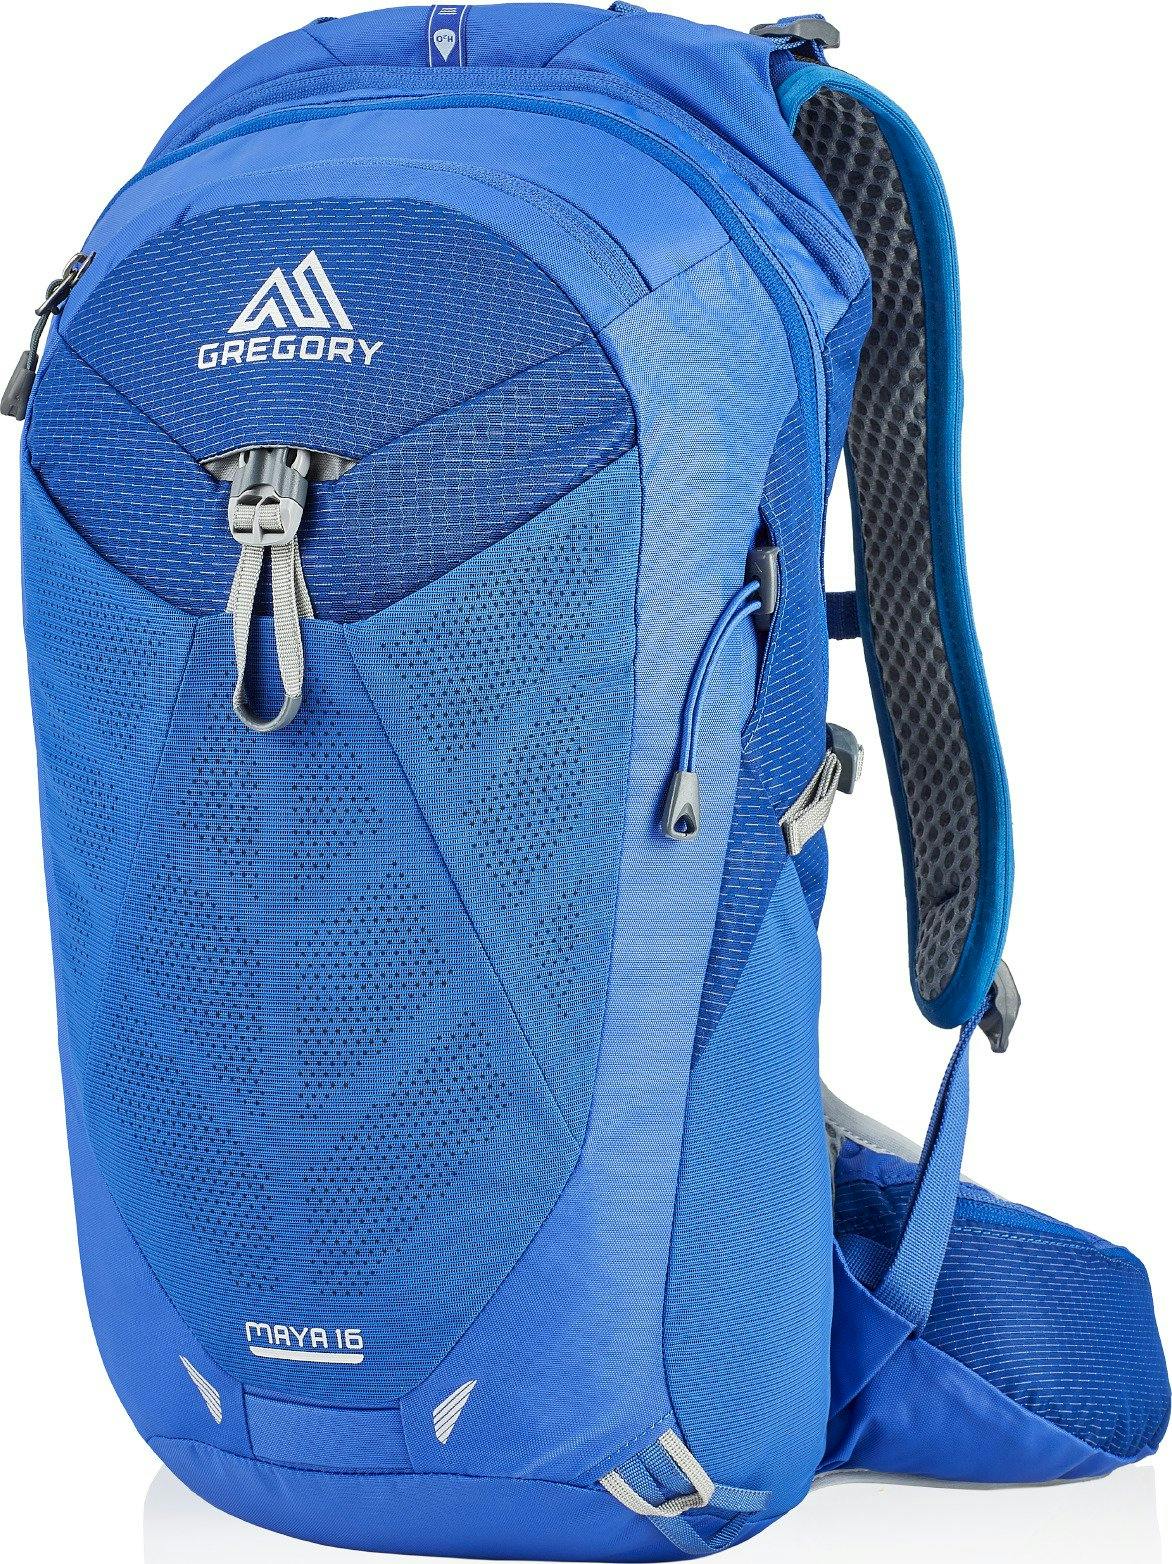 Product image for Maya Backpack 16L - Women’s